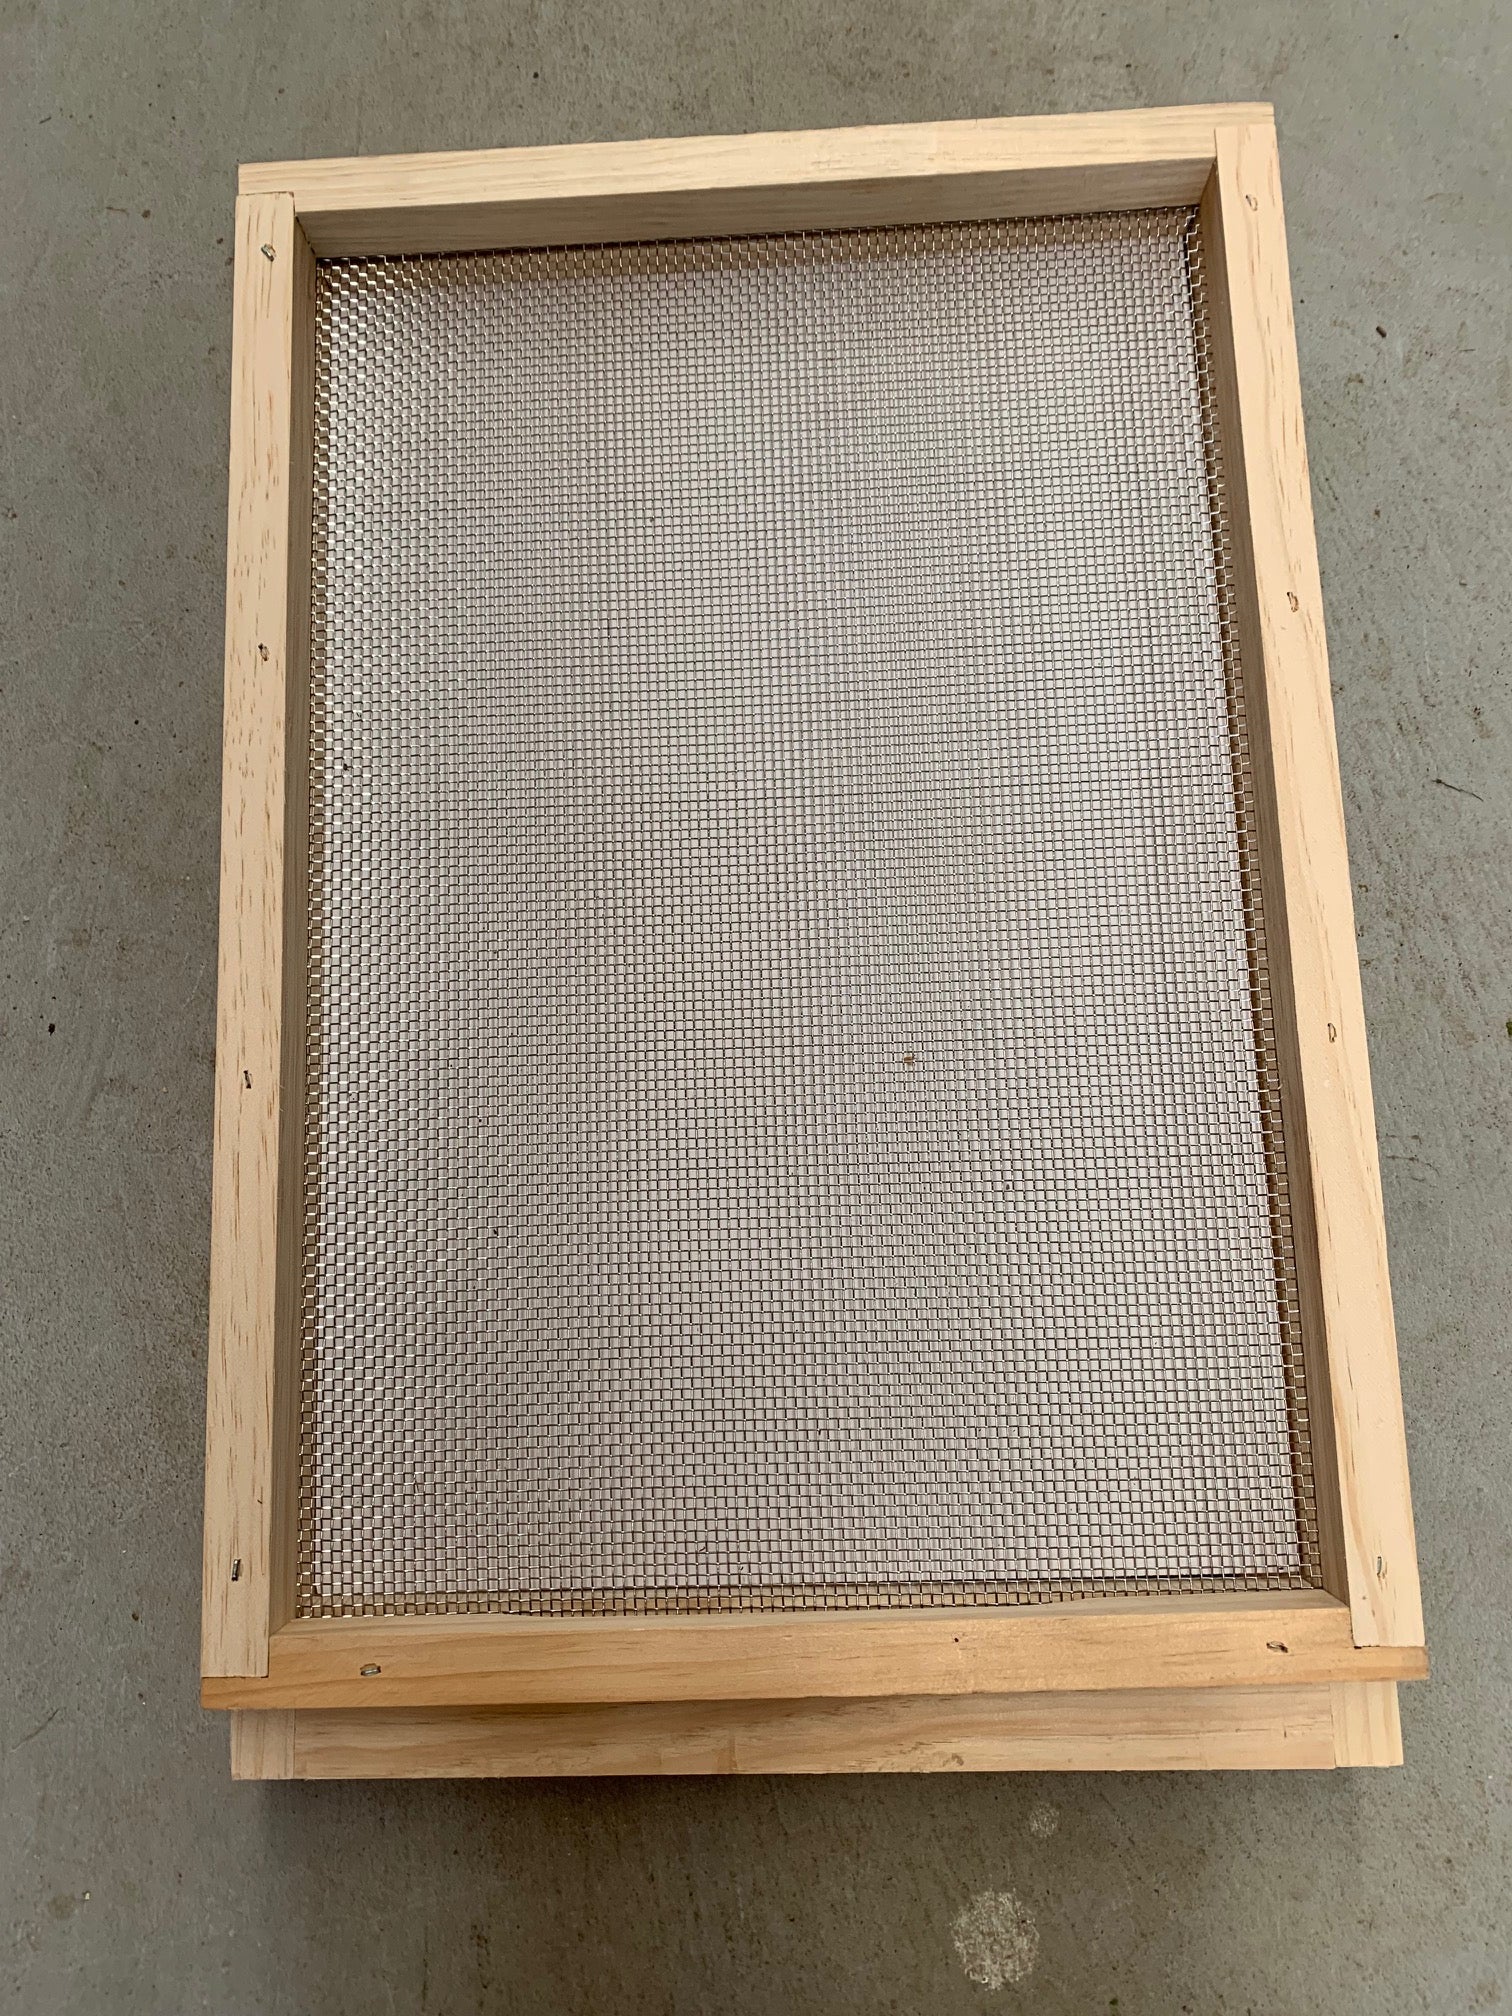 Bottom Board 8 frames with stainless steel mesh